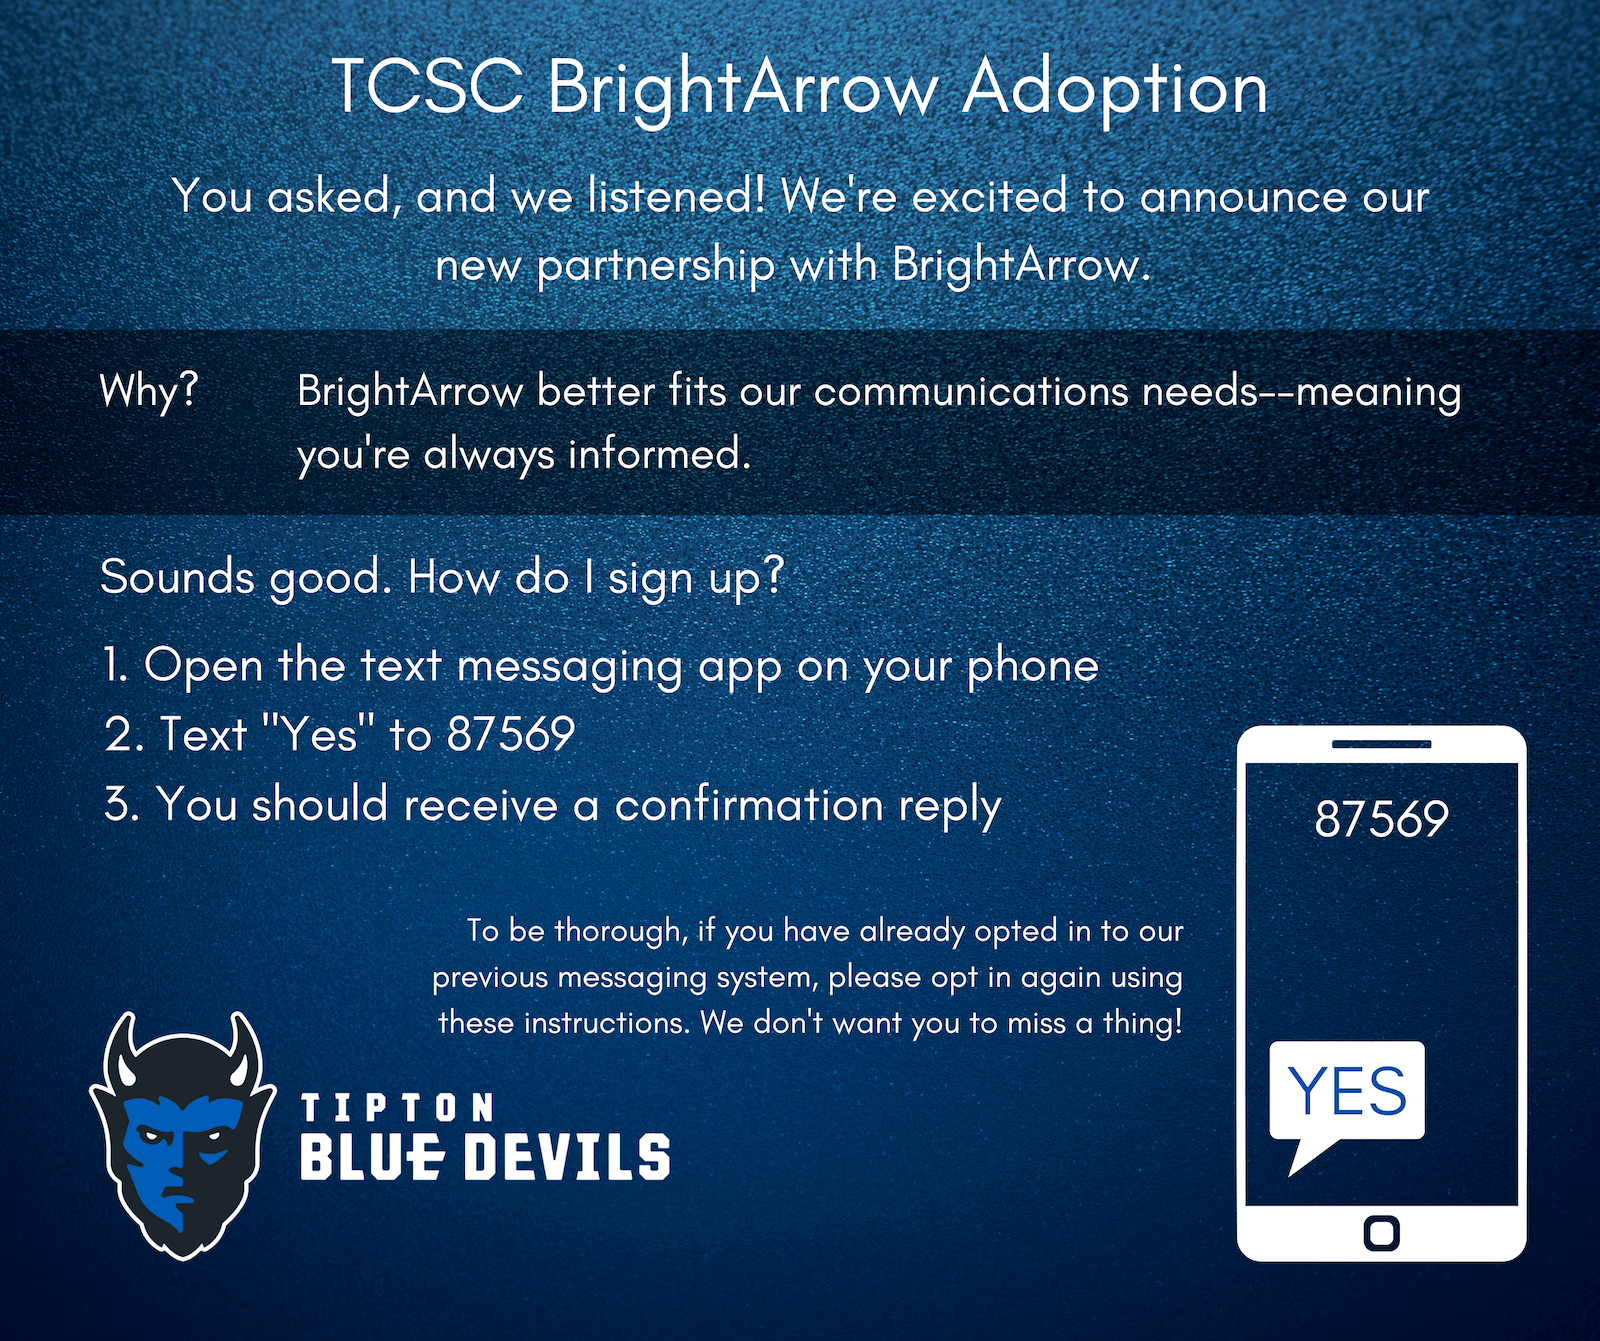 Promotional graphic for TCSC's BrightArrow adoption. Opt in for communications by texting 'yes' to 87569.